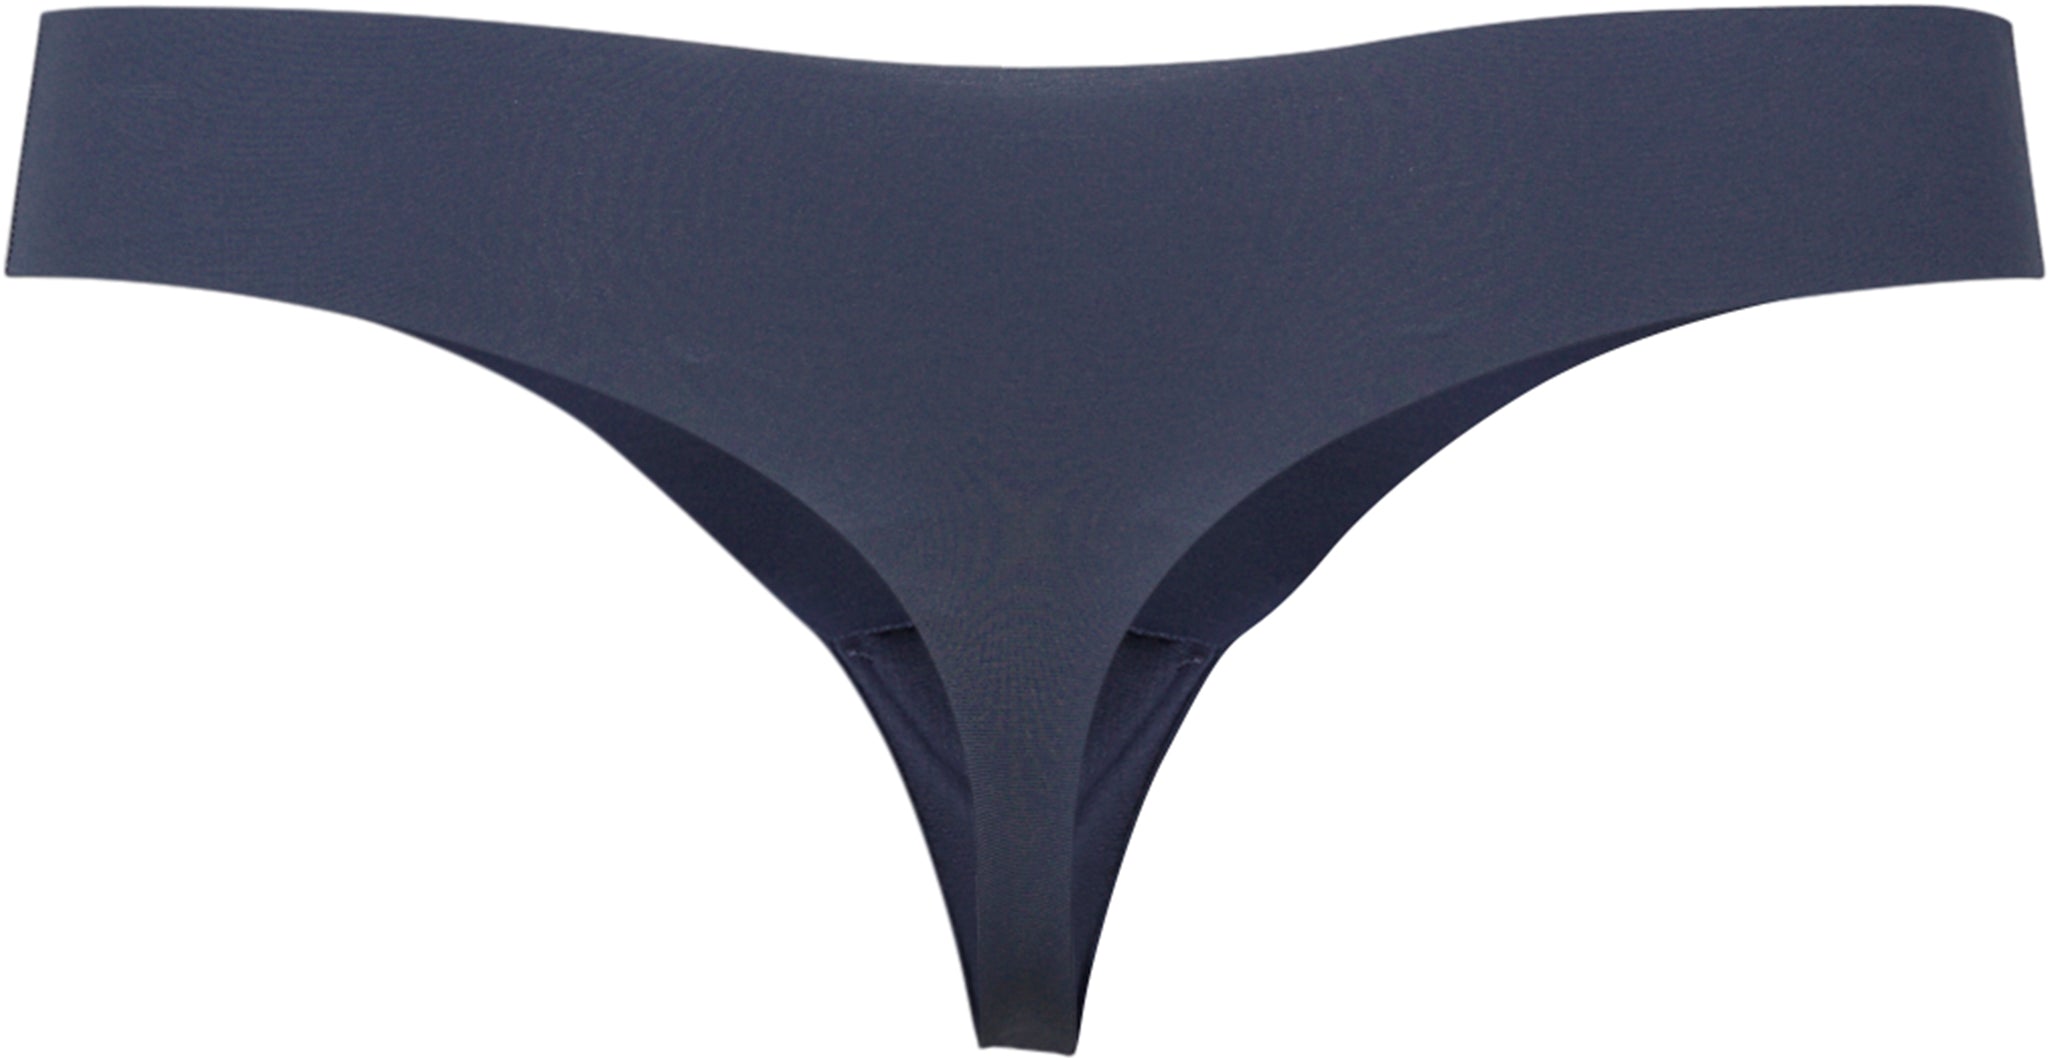 Under Armour Ps Thong 3pack - Seamless panty